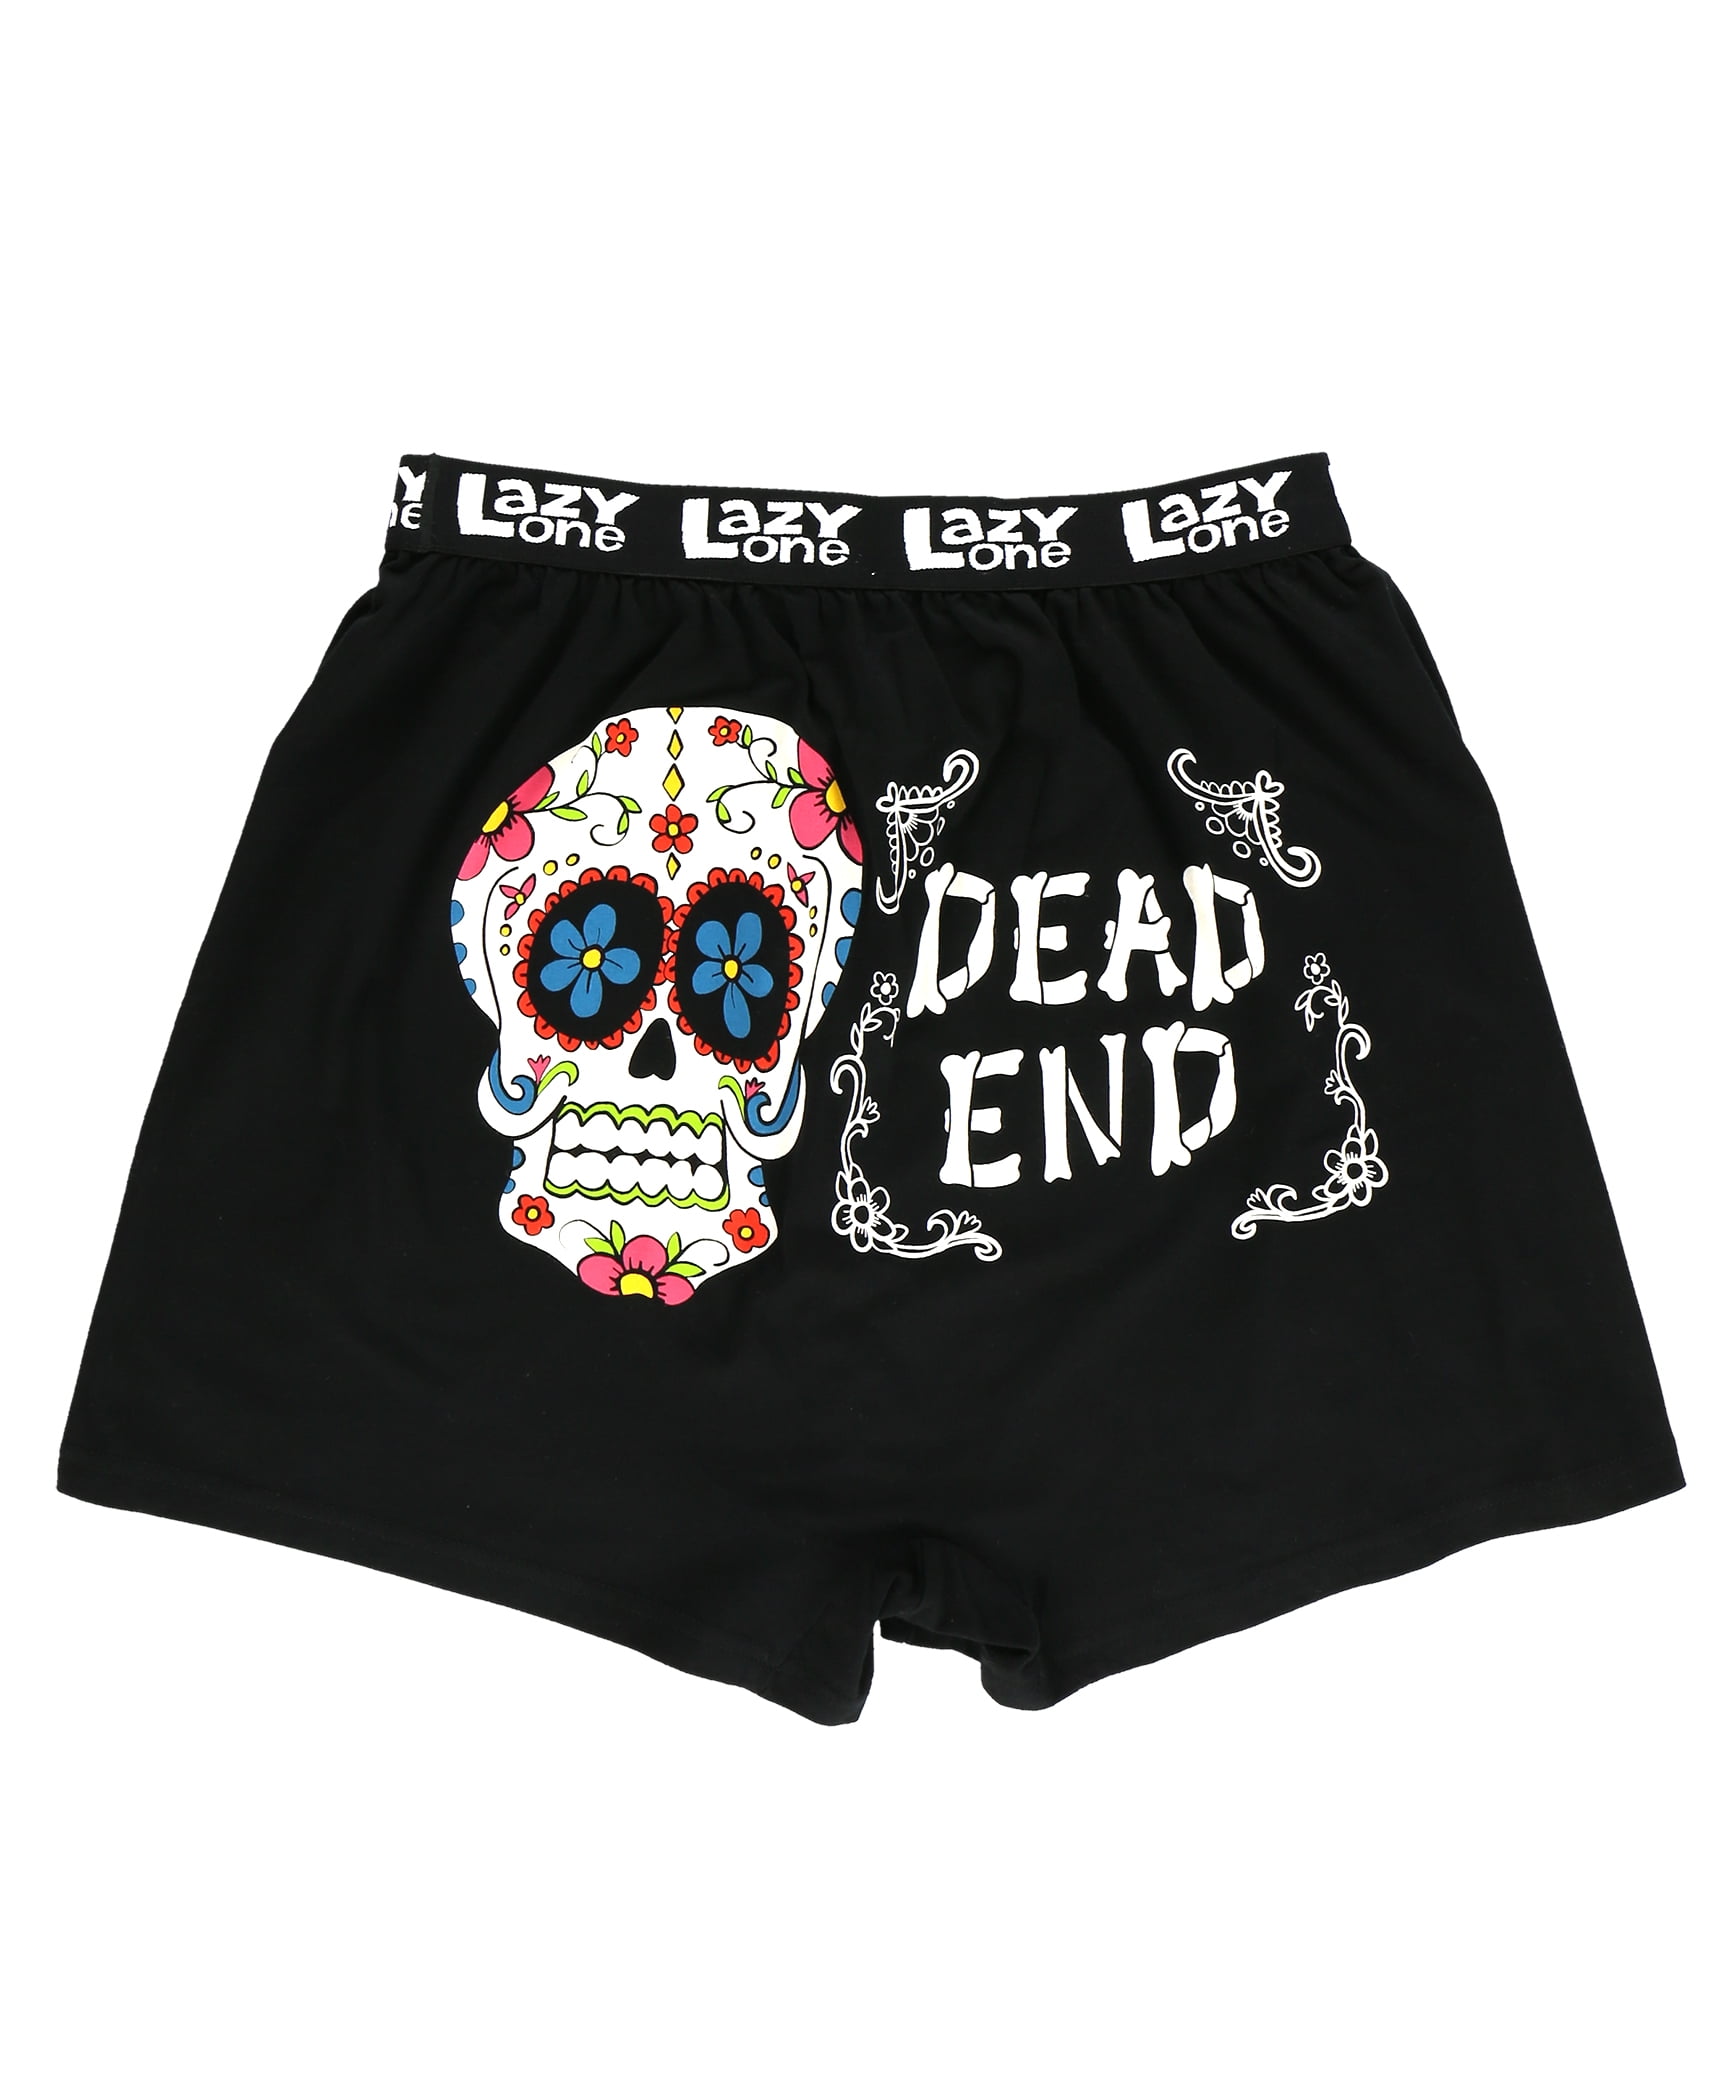 Novelty Boxer Shorts Gag Gifts for Men Dead End, Large Lazy One Funny Boxers Day of The Dead Humorous Underwear Sugar Skull